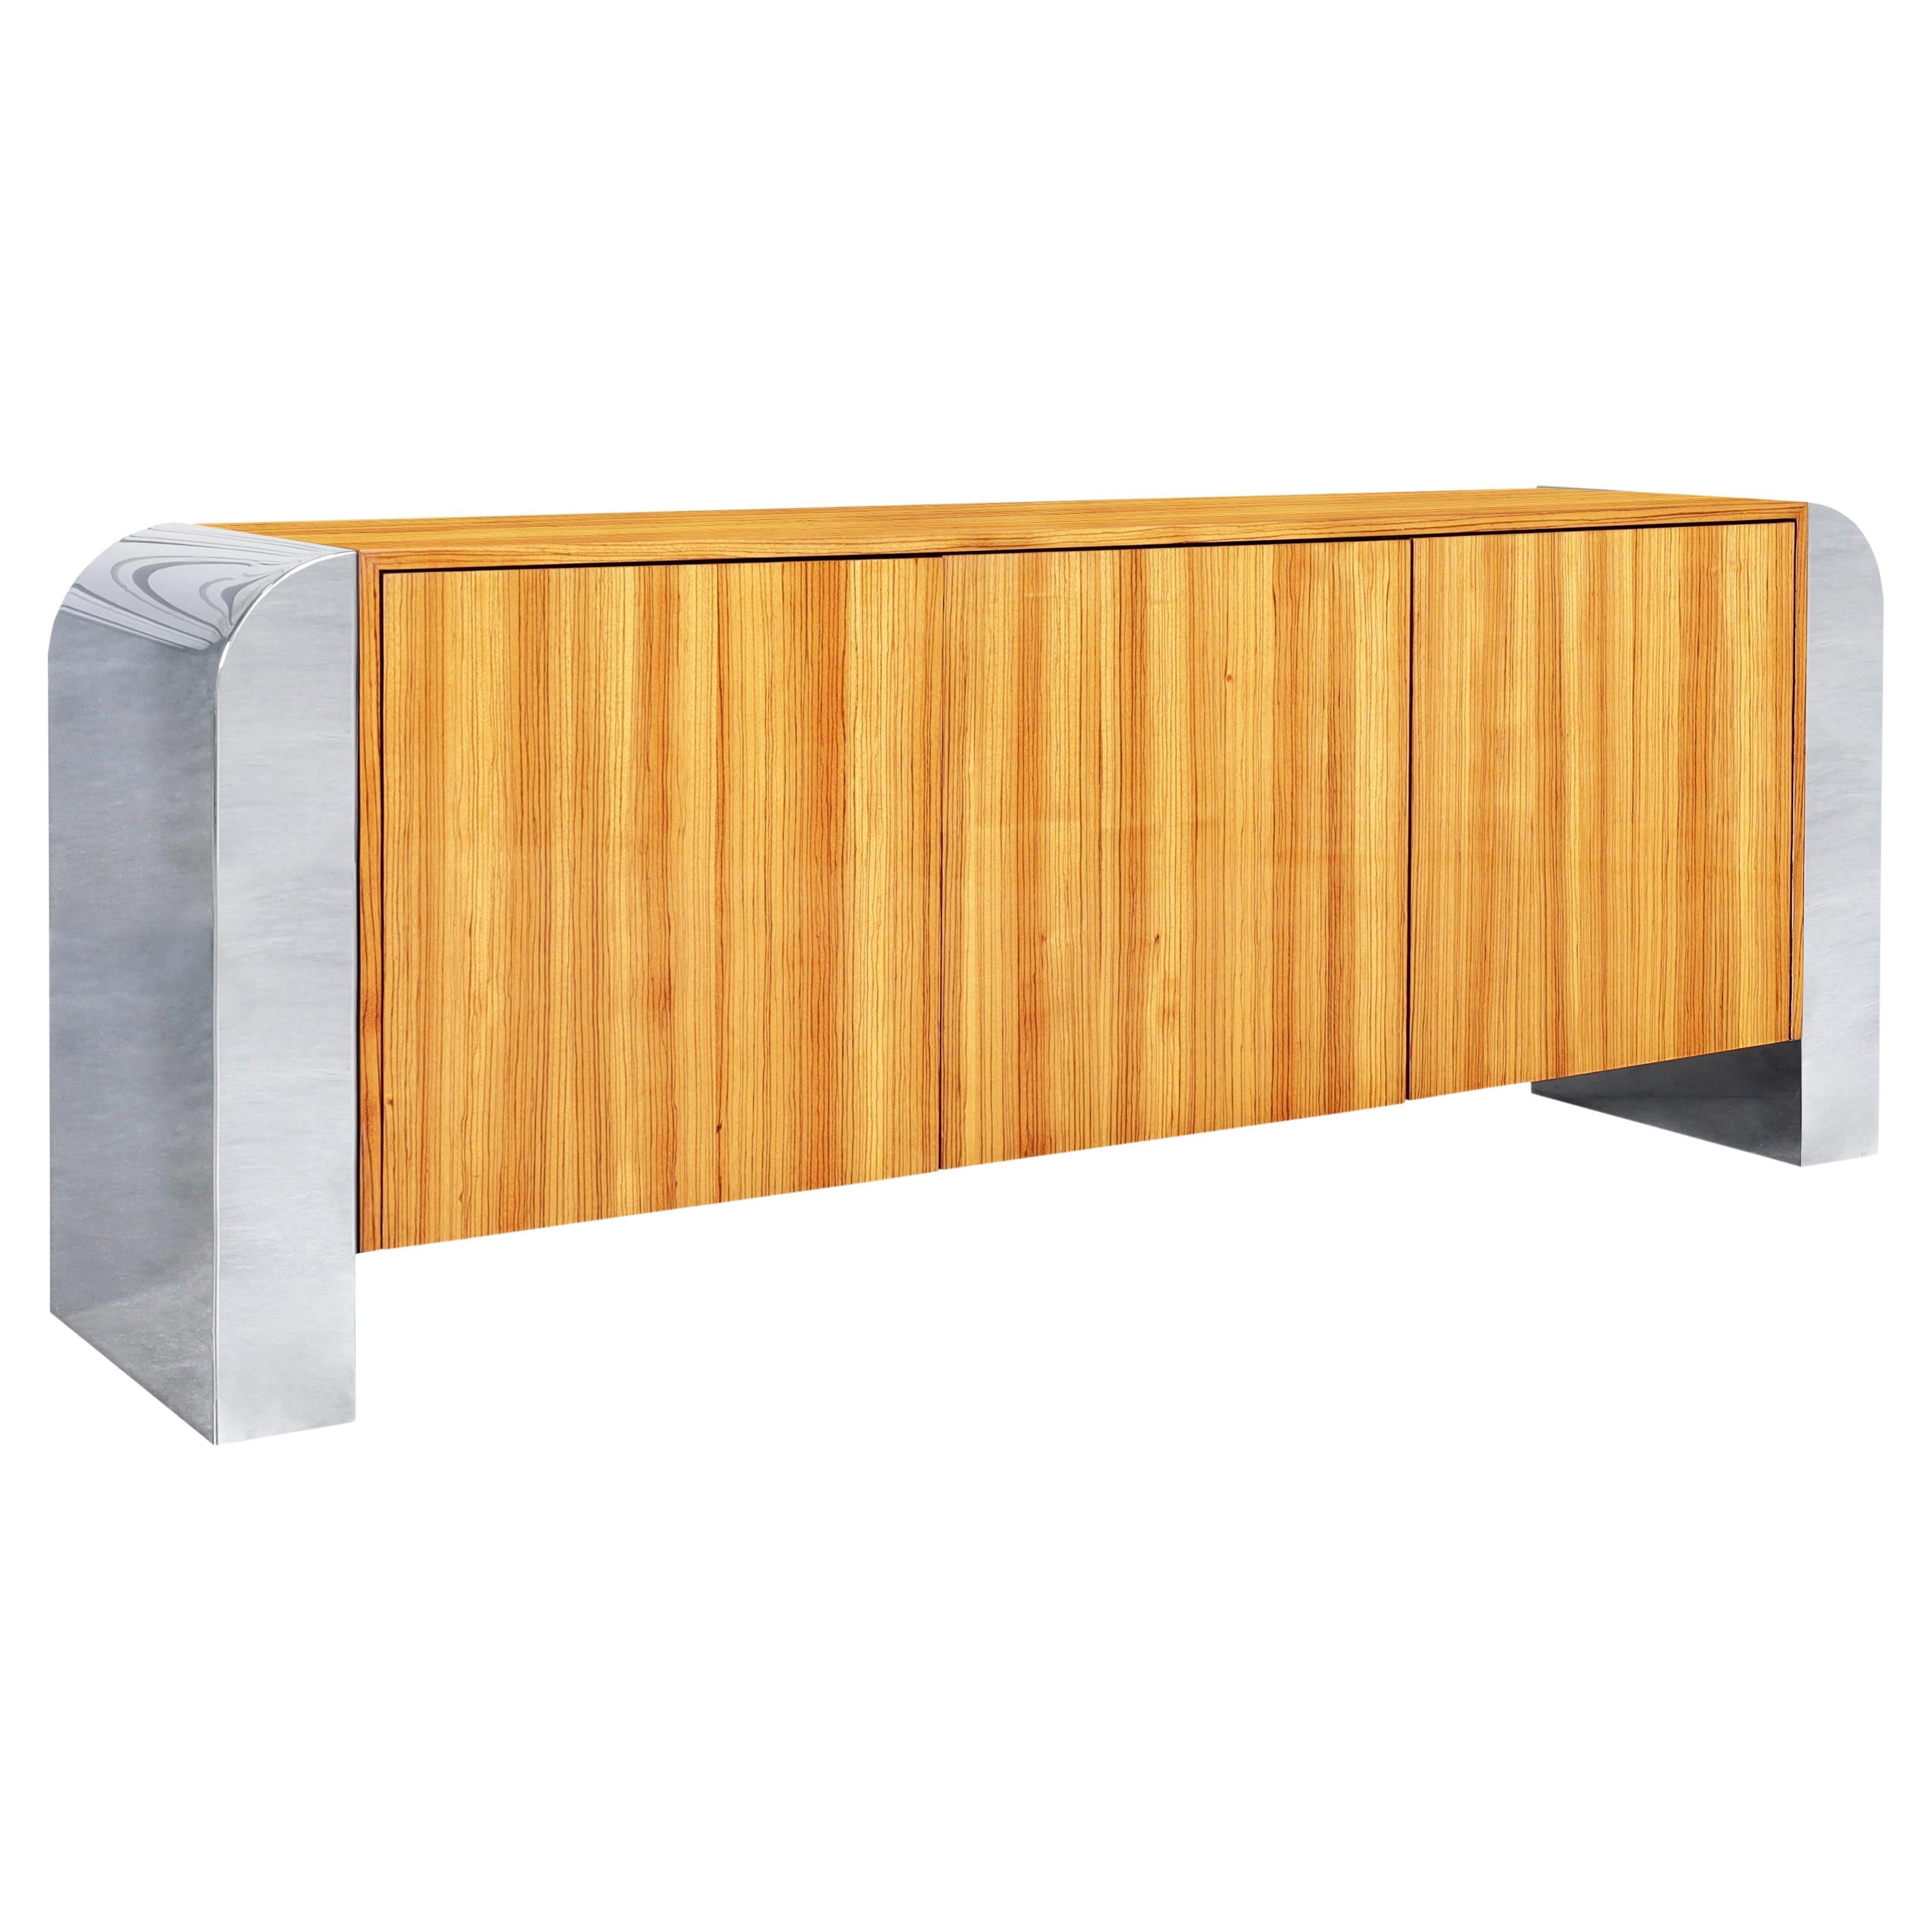 Monumental Stainless Steel "Waterfall" Credenza by John Mascheroni For Sale